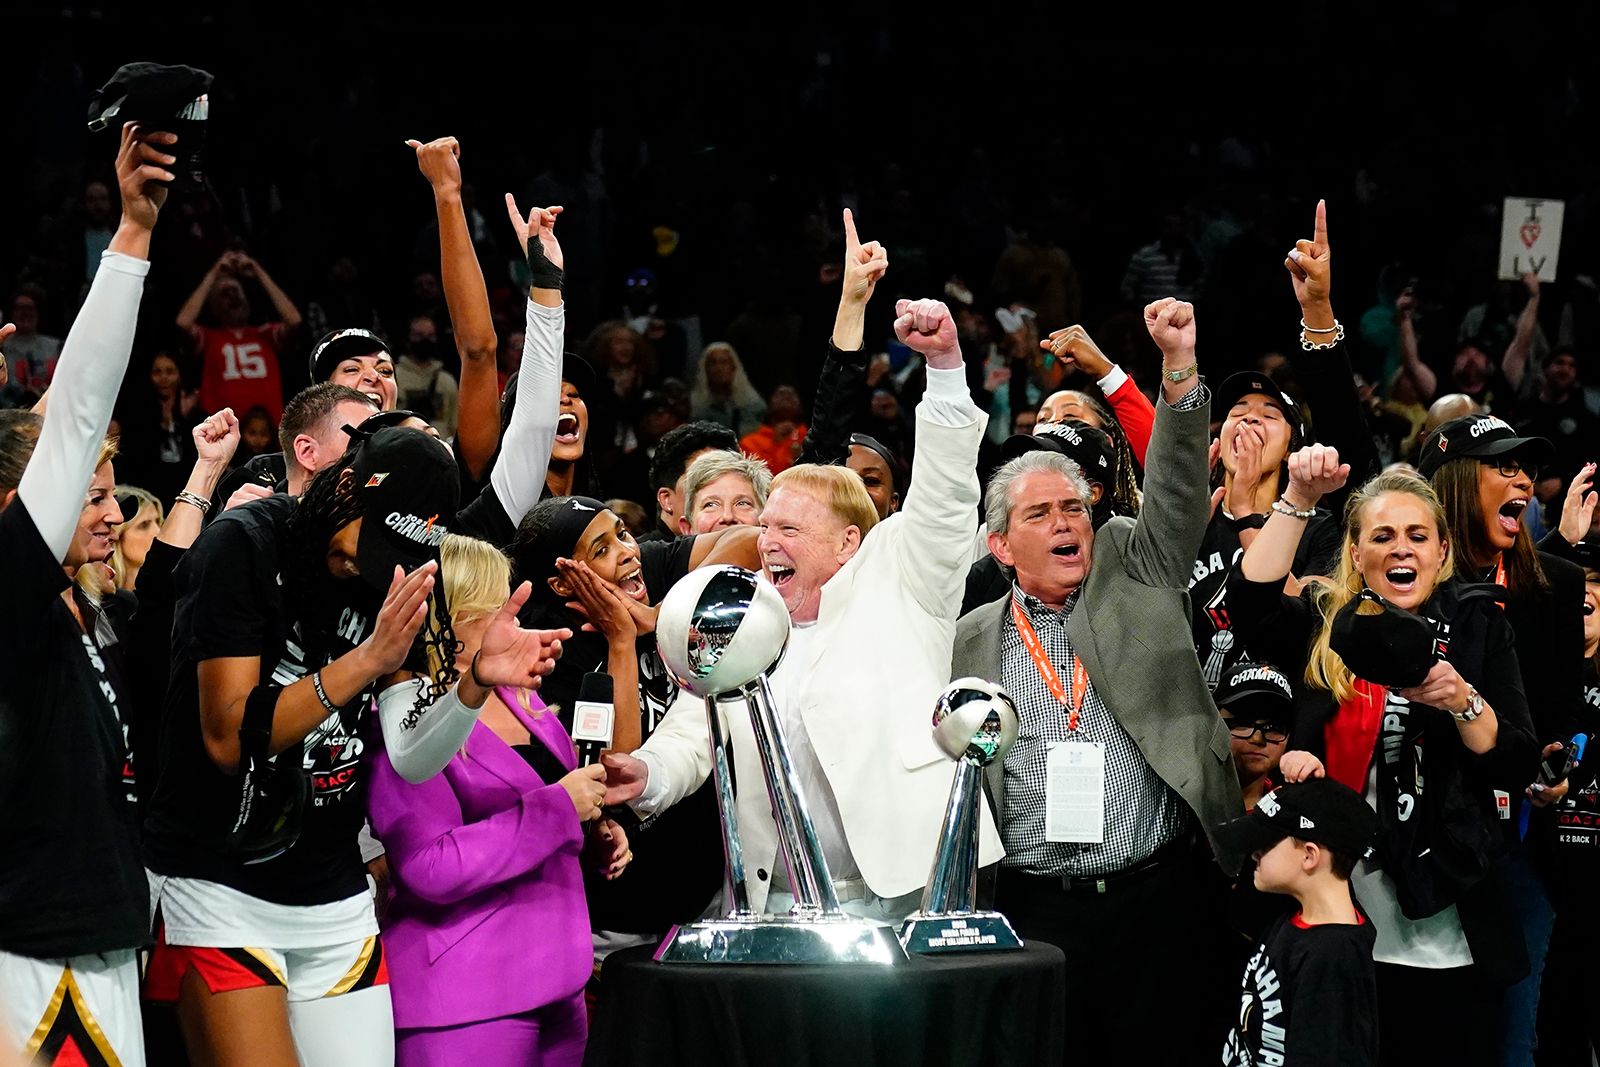 ESPN - THE LAS VEGAS ACES REPEAT AS WNBA CHAMPIONS 👏 THEY